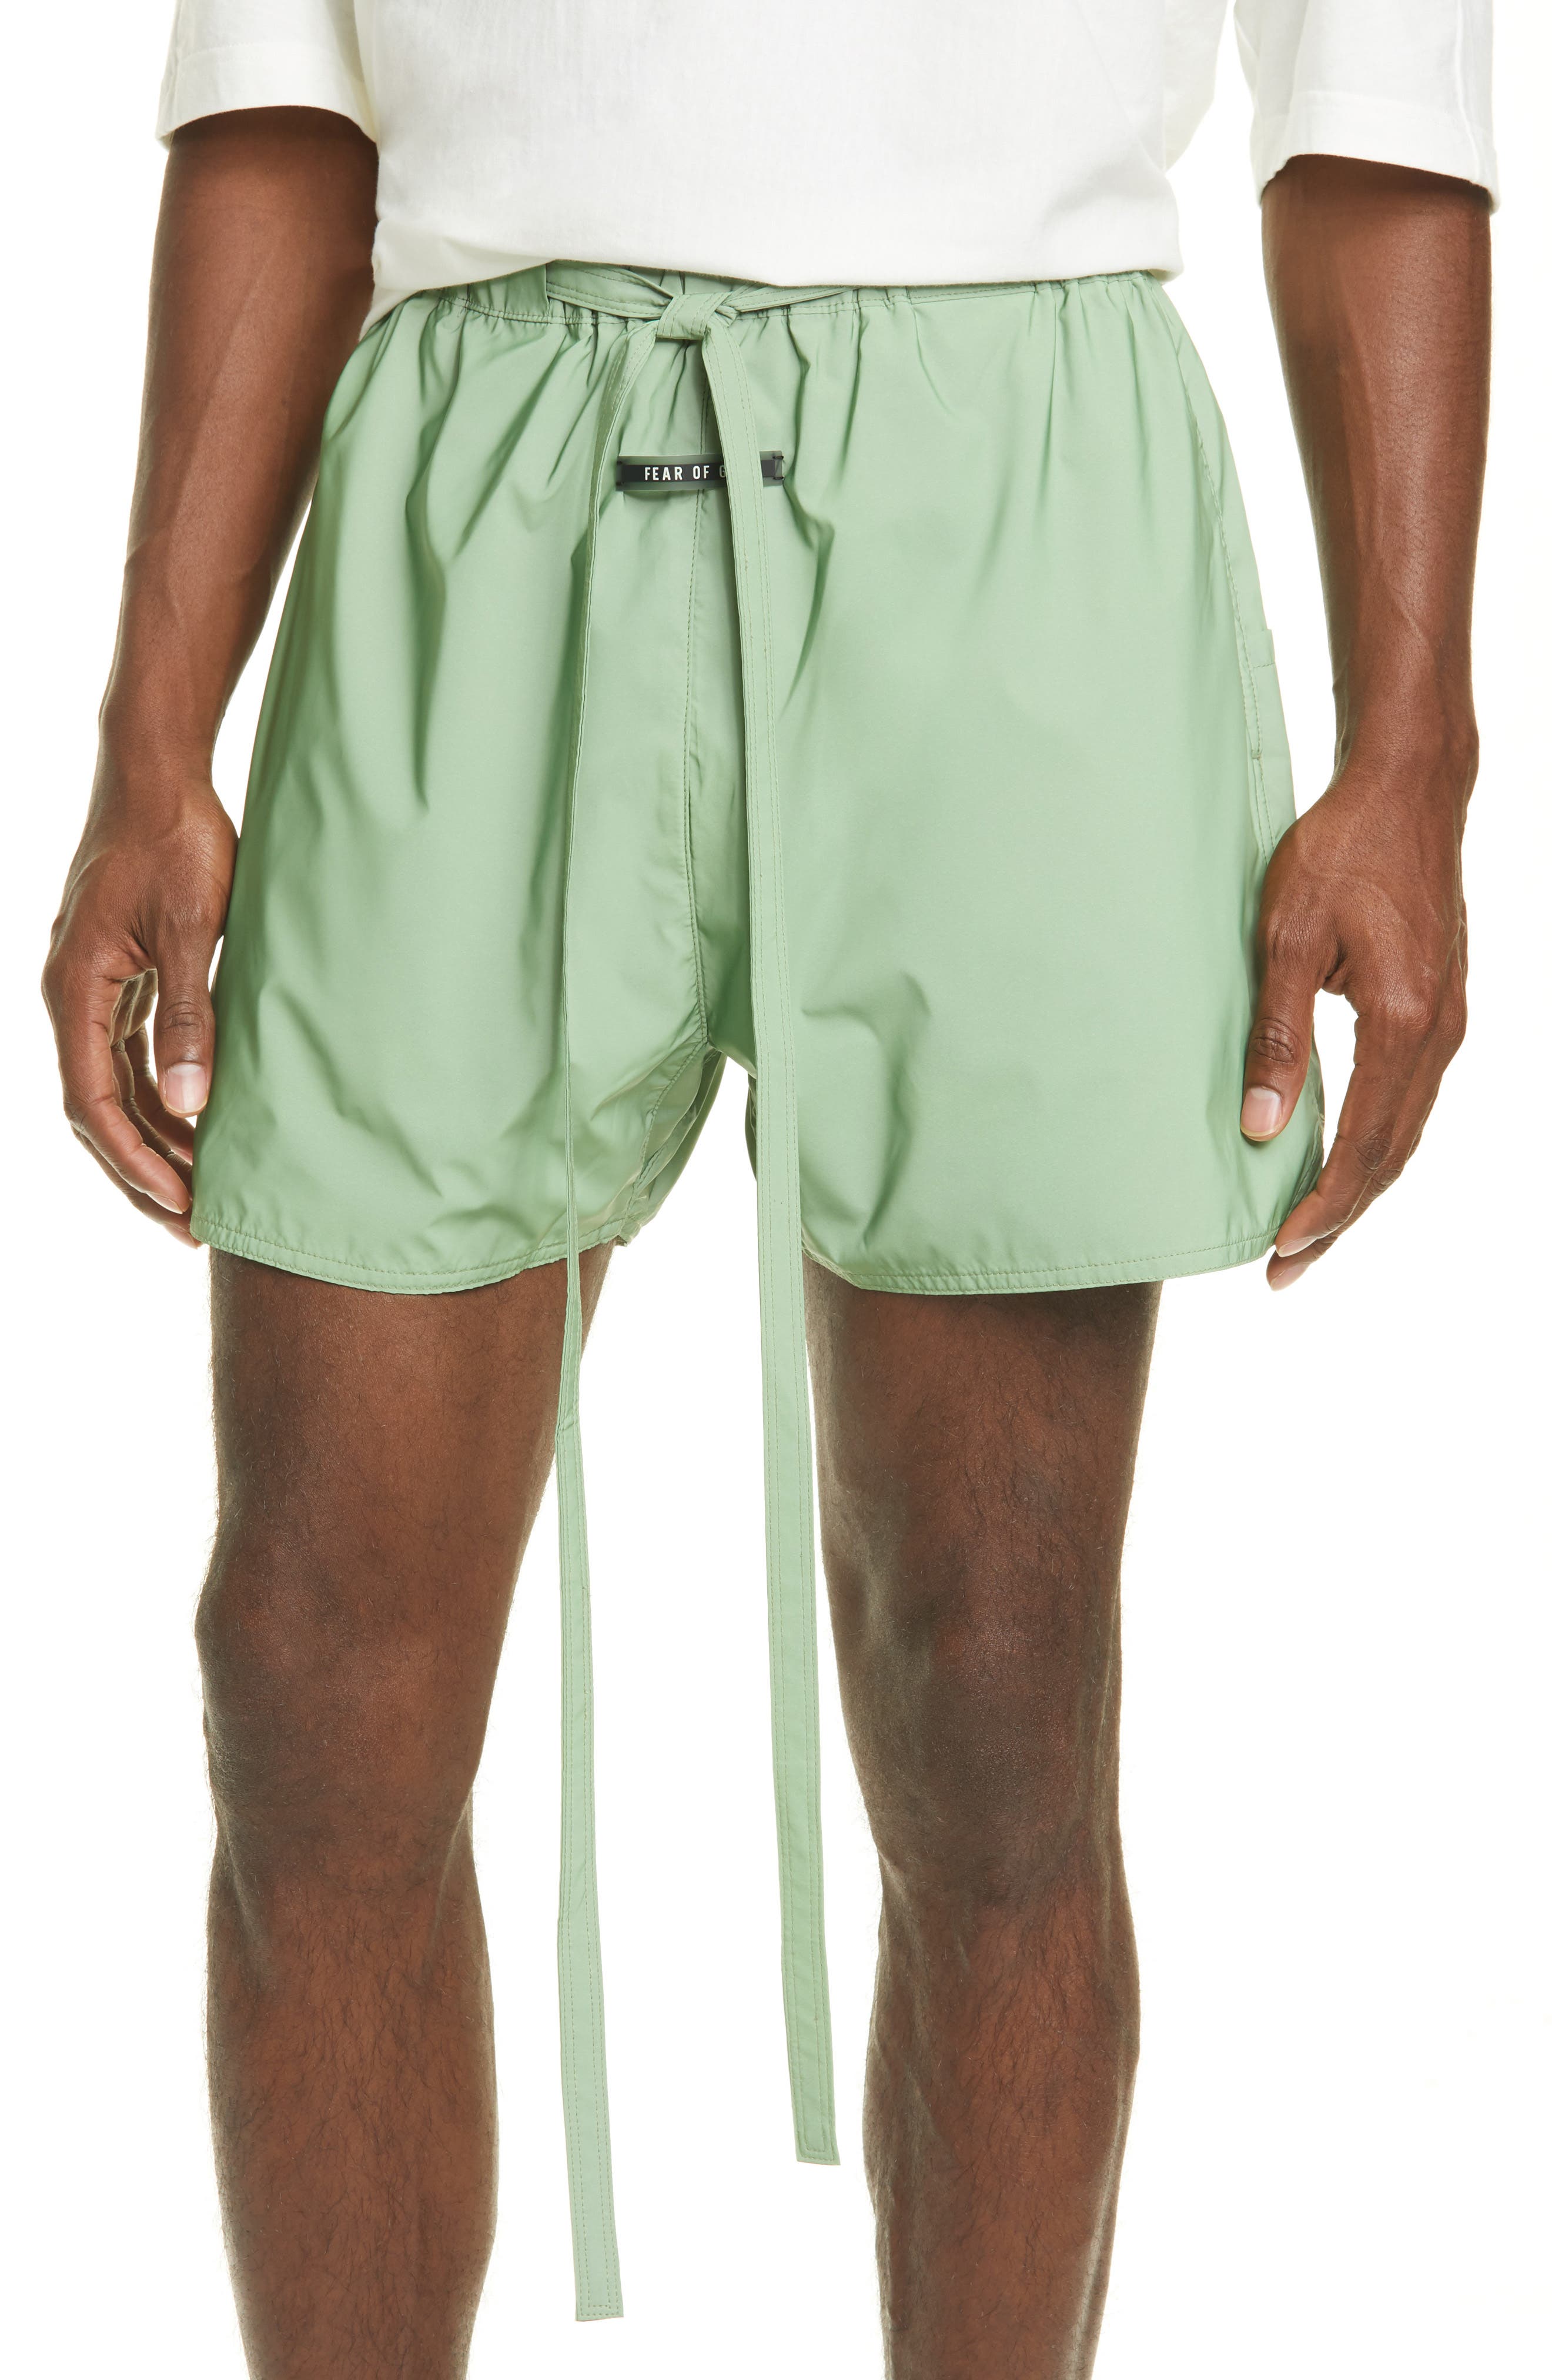 fear of god military physical training short